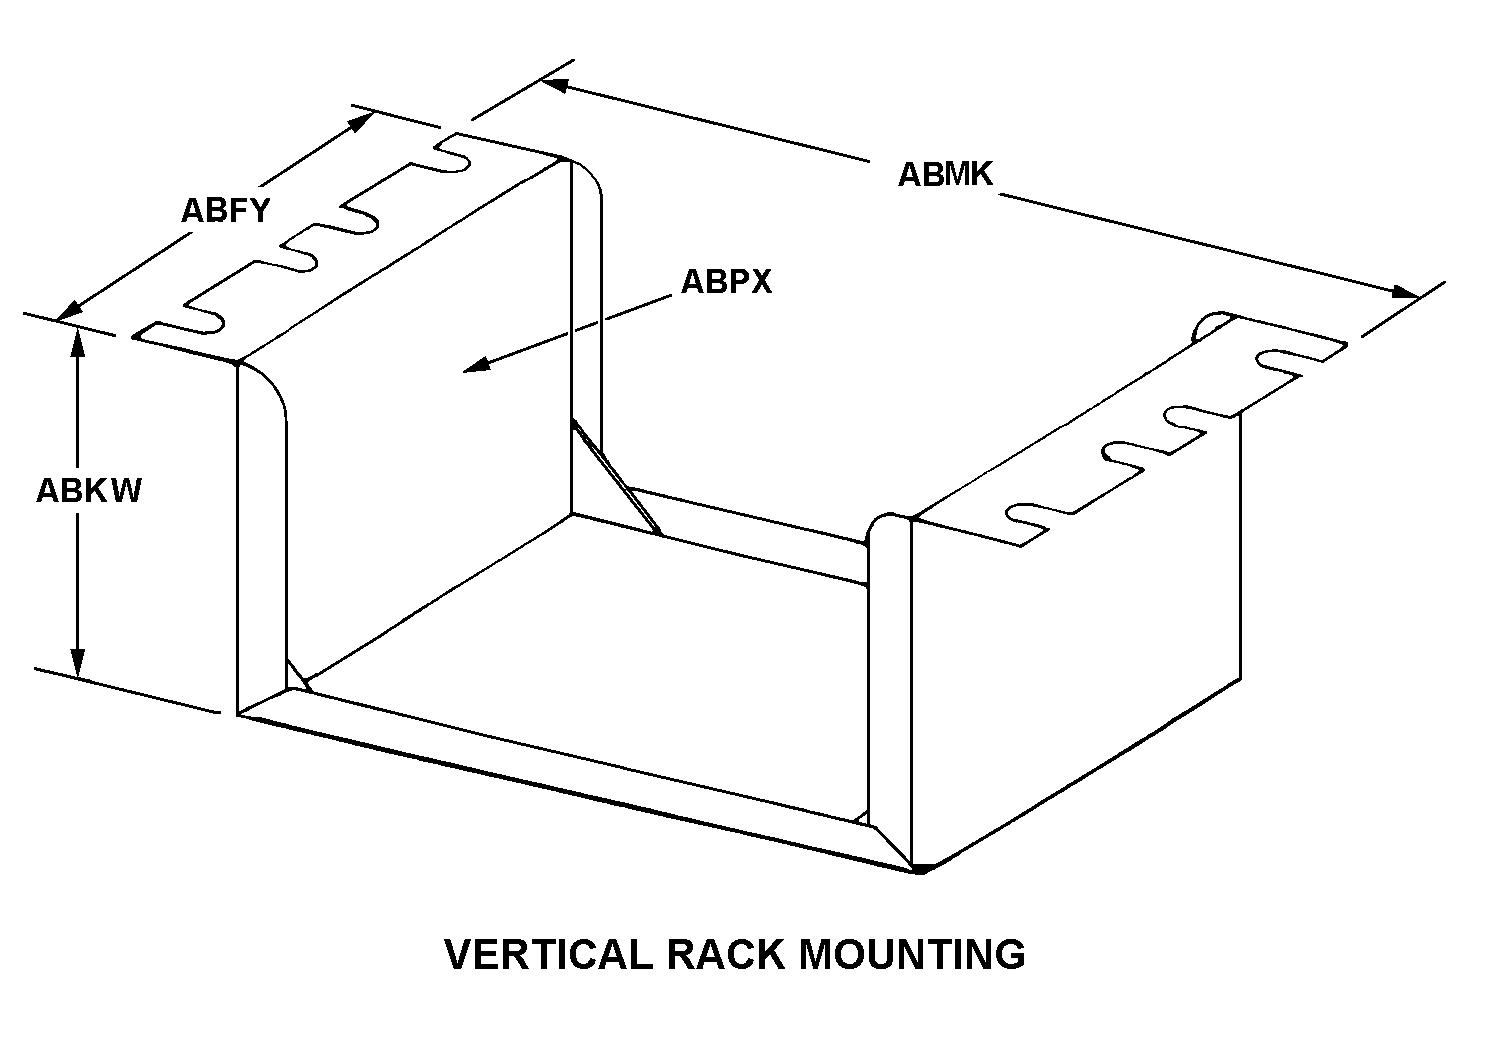 VERTICAL RACK MOUNTING style nsn 5975-01-389-4415